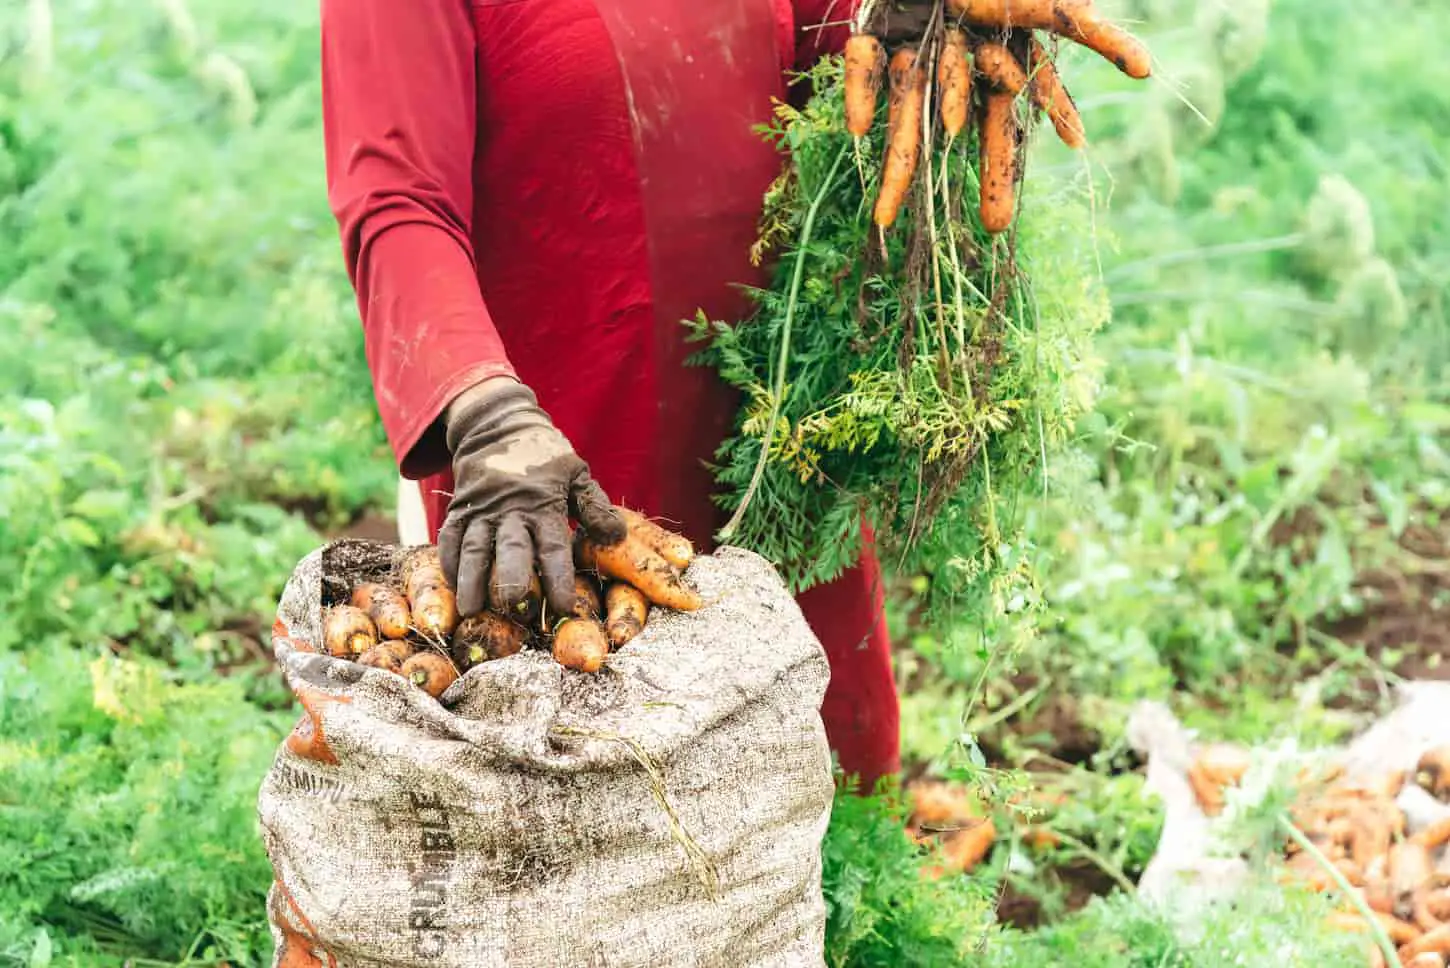 An image of a farmer harvesting carrots. The farmer puts loads of carrots in a full sack while holding another set of carrots in his other hand.